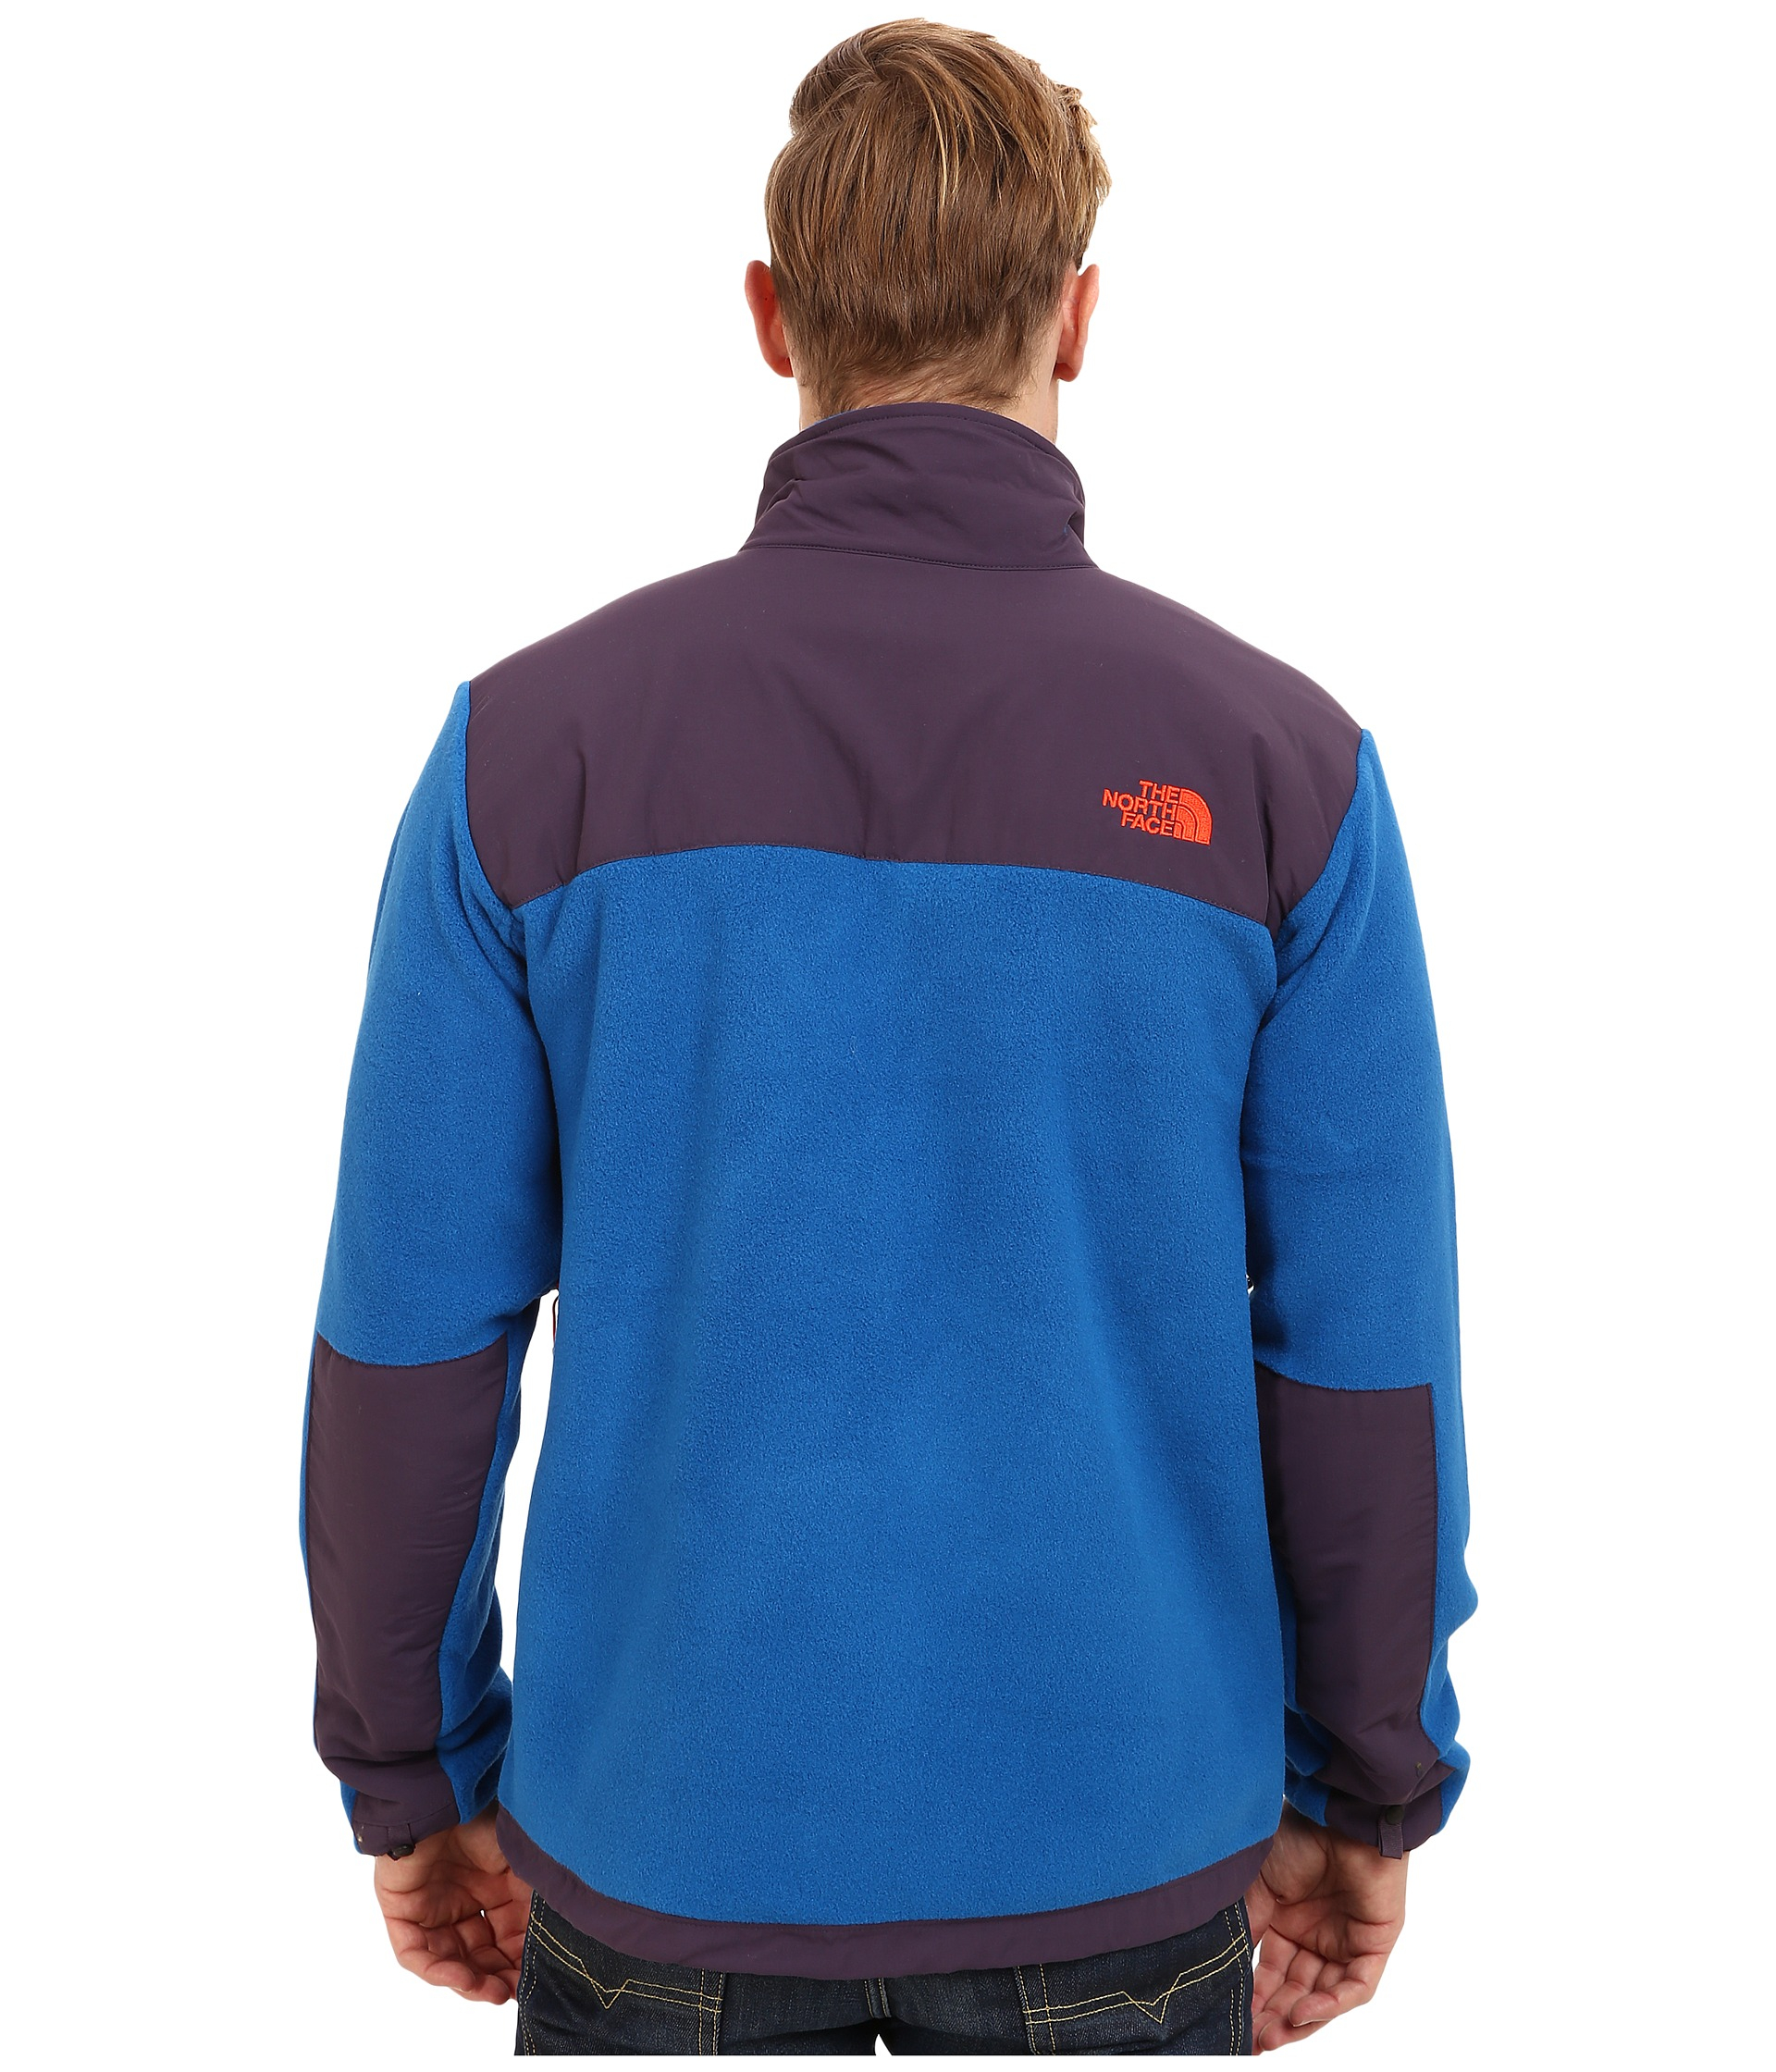 Lyst - The north face Denali Jacket in Blue for Men